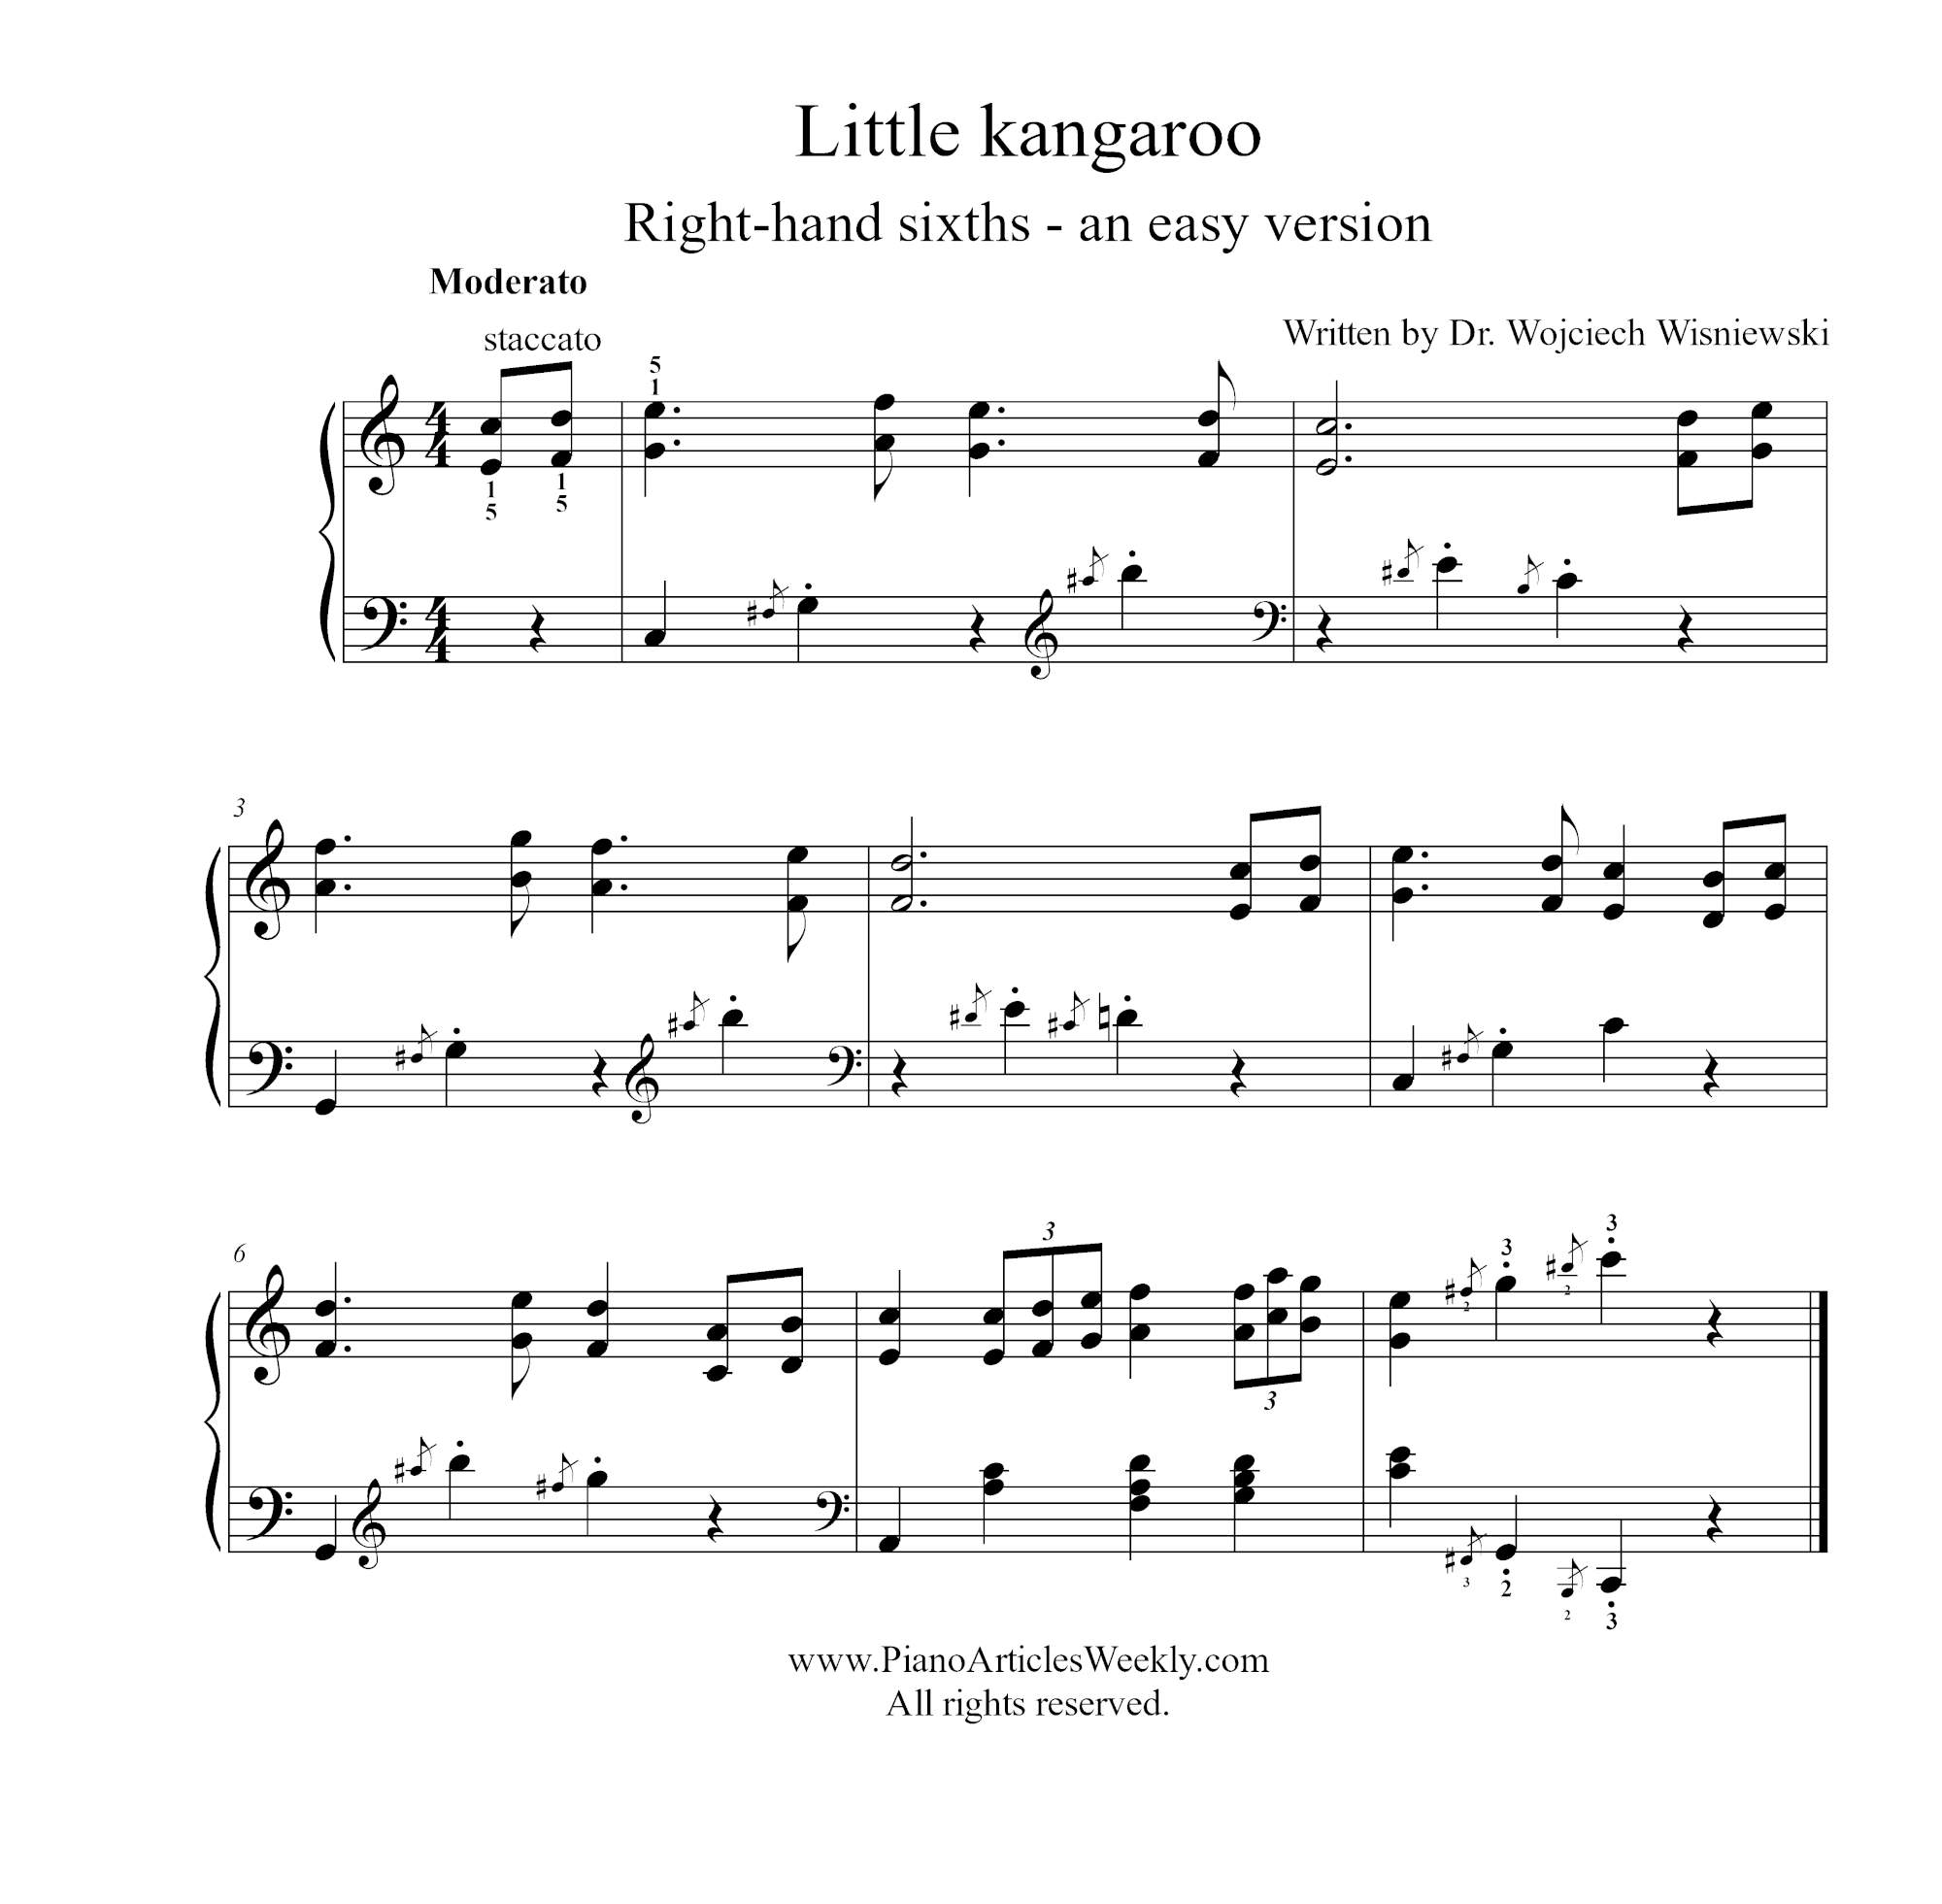 Little kangaroo - right hand sixths easy small hands octaves exercises